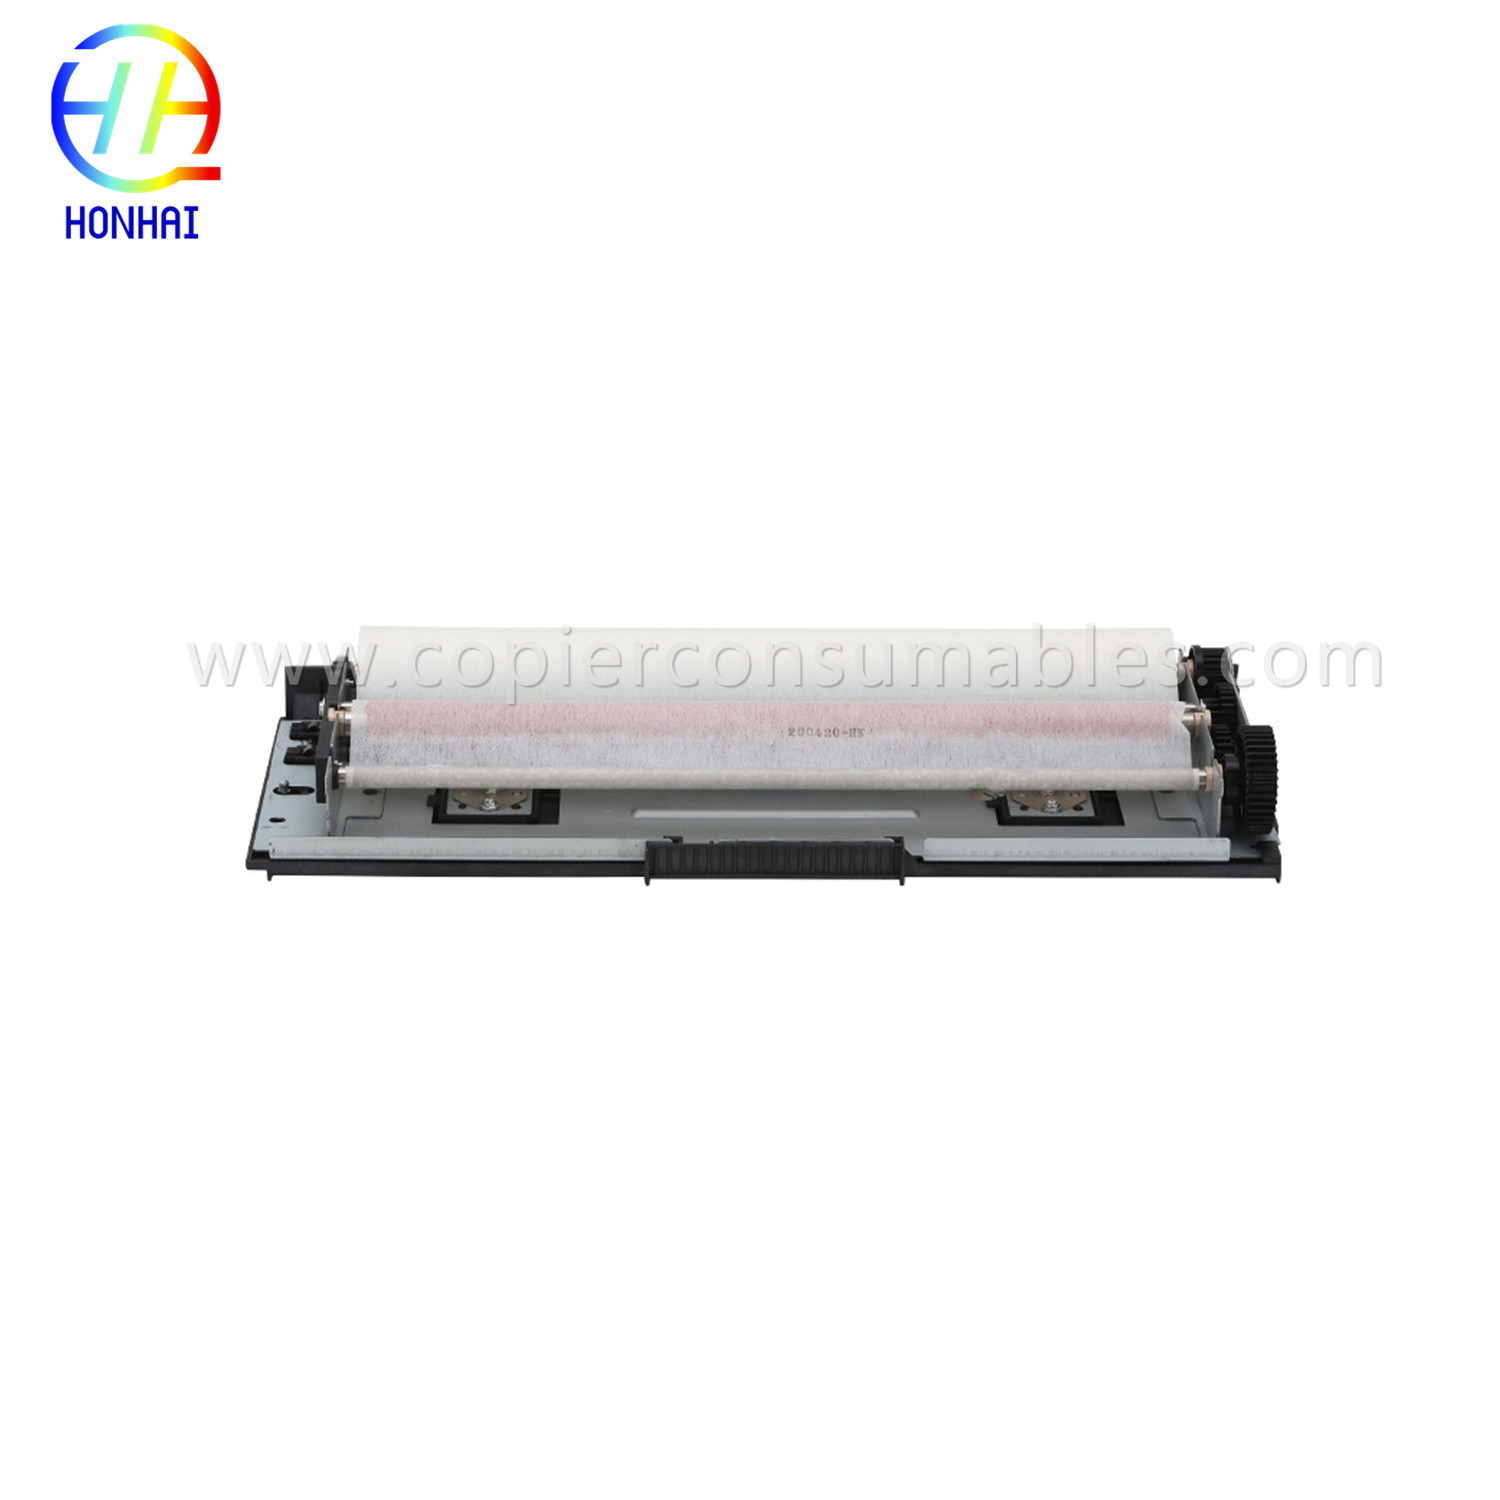 Fuser Cleaning Web Assembly for Xerox 4110 4112 4127 4590 4595 160 008r13085